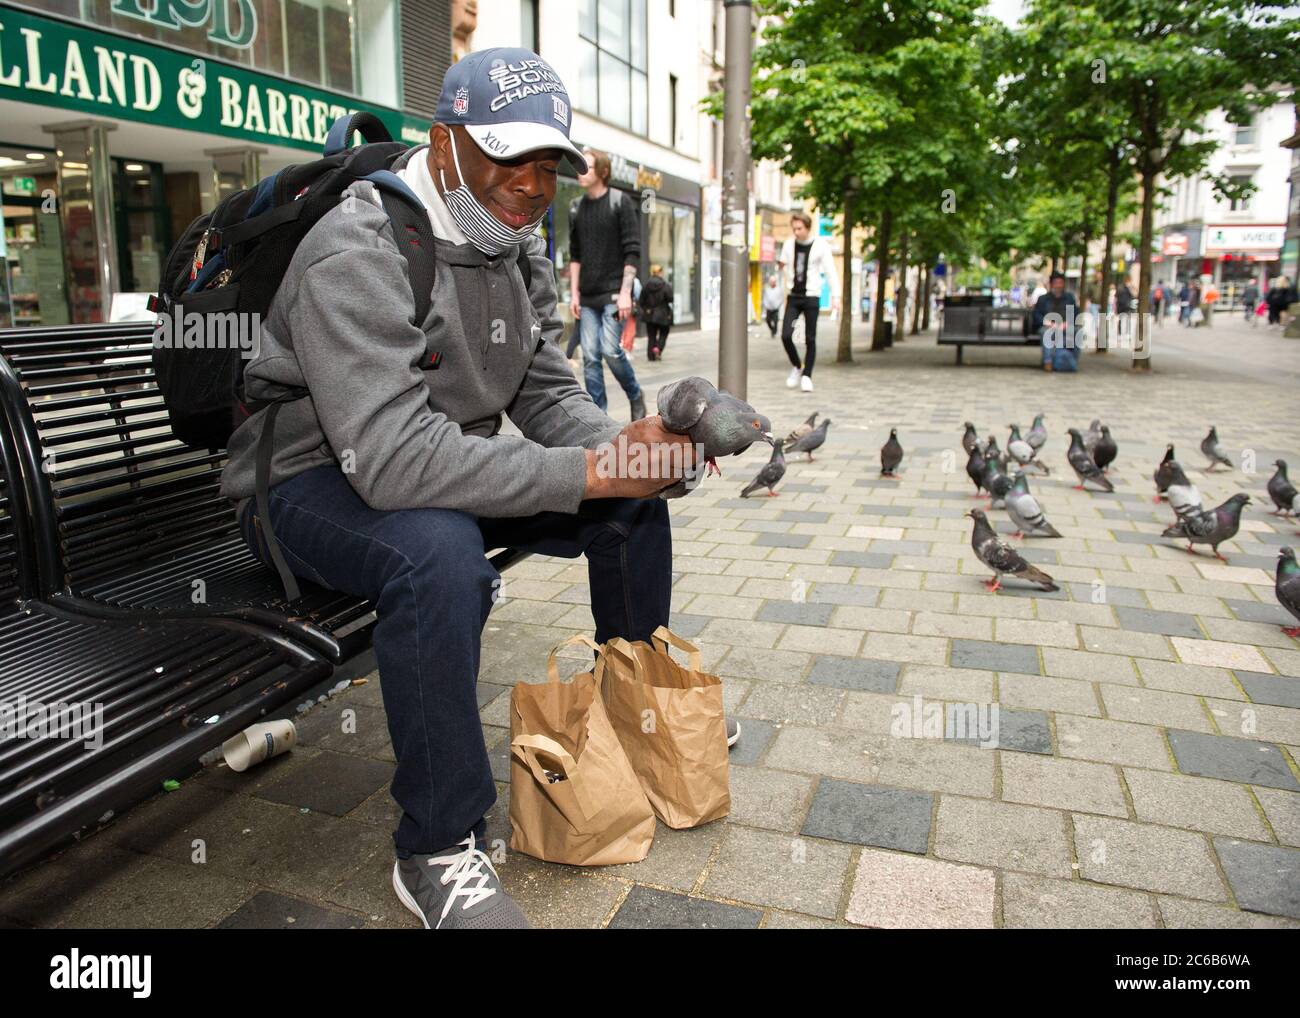 Glasgow, Scotland, UK. 8th July, 2020. Pictured: A man feeds pigeons by hand in Sauchielhall Street of Glasgows shopping district. Credit: Colin Fisher/Alamy Live News Stock Photo